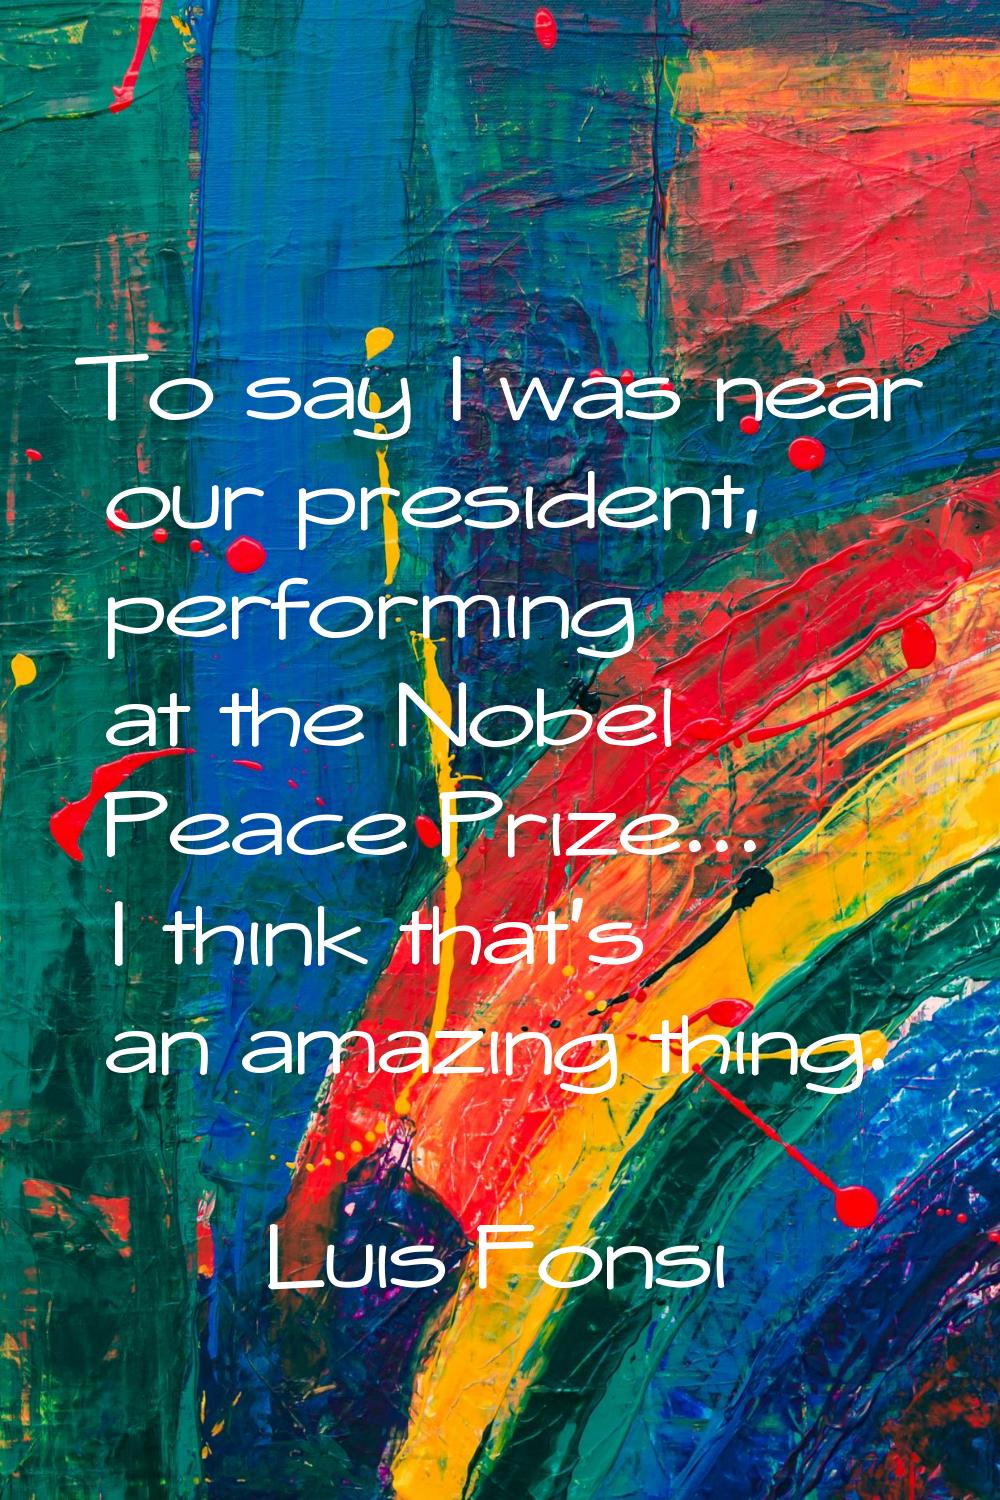 To say I was near our president, performing at the Nobel Peace Prize... I think that's an amazing t